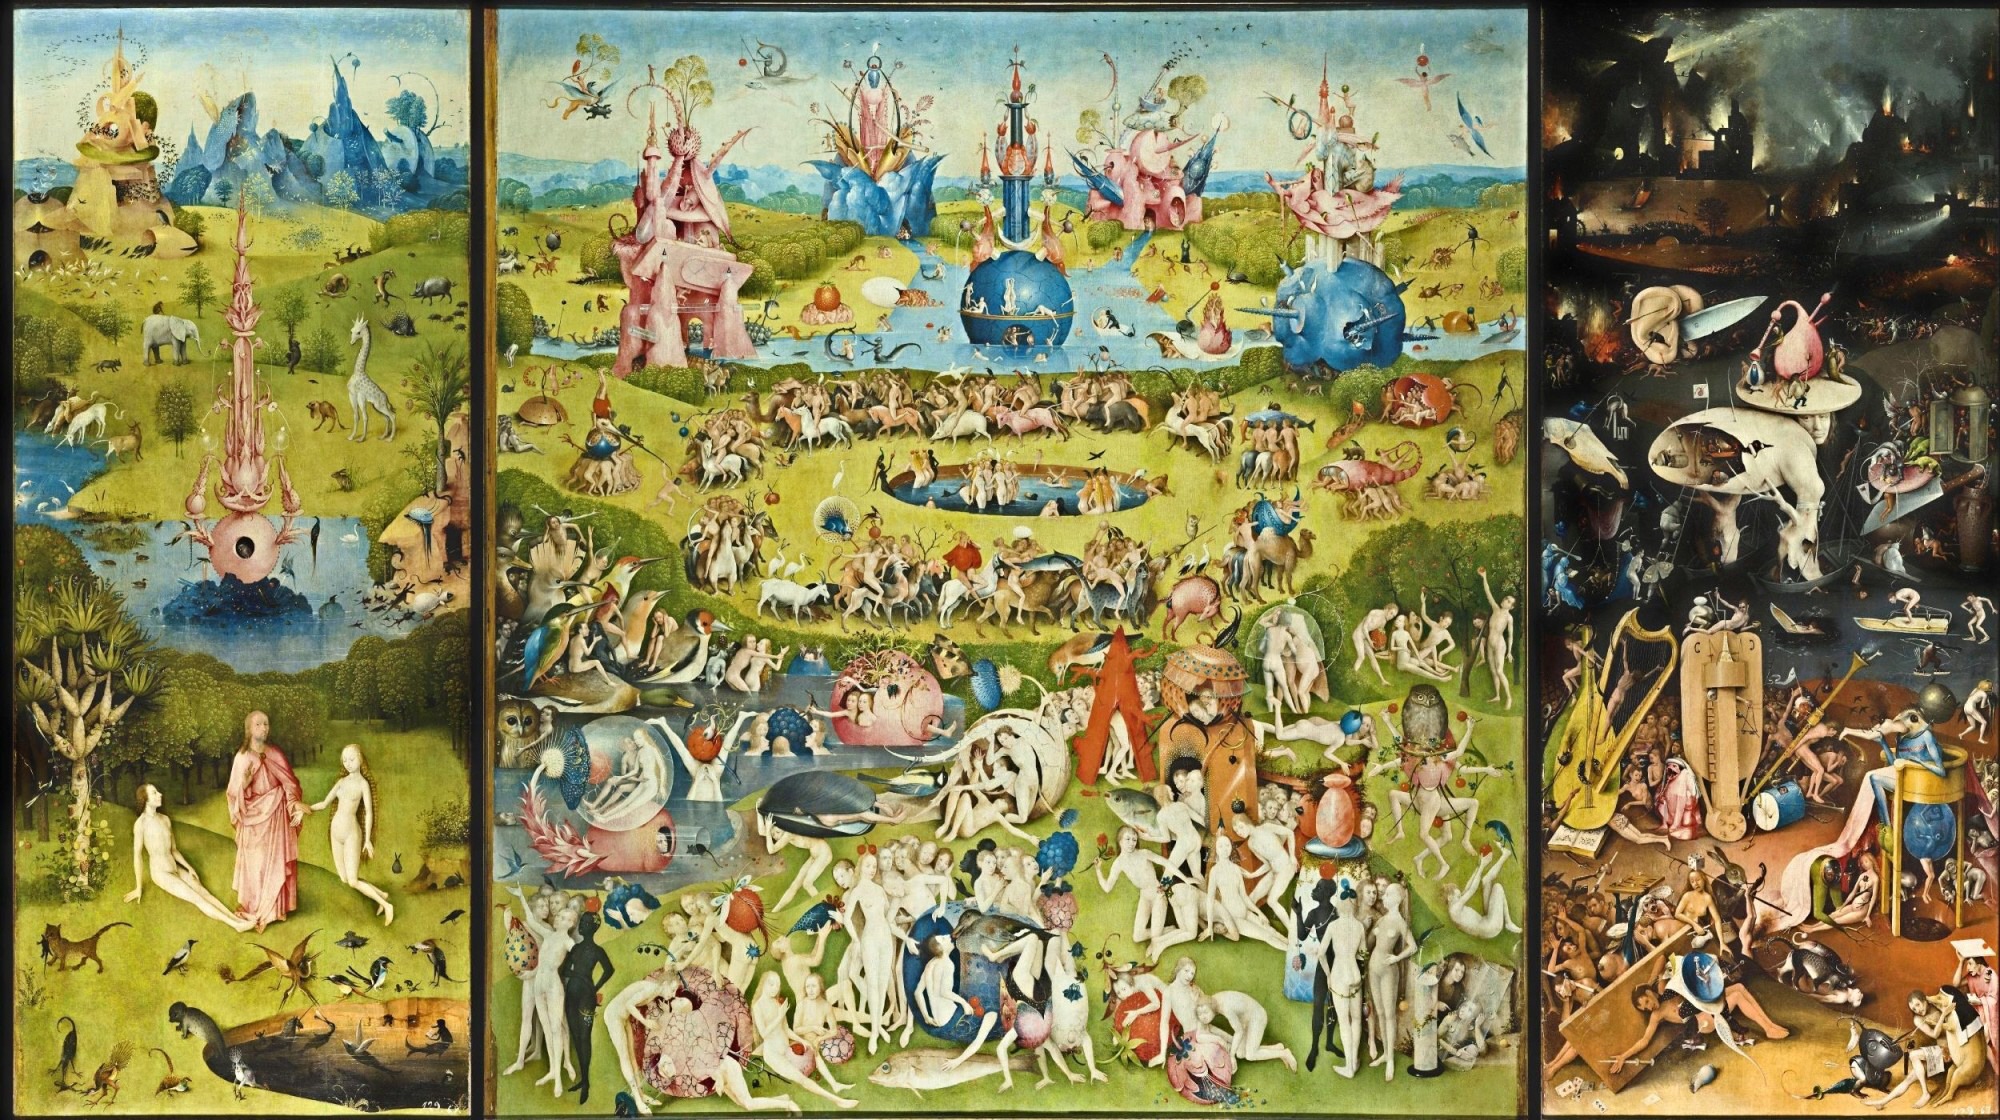 hieronymus-bosch-the-garden-of-earthly-delights-the-creation-of-eve-left-wing-the-garden-of-earthly-delights-central-panel-hell-right-wing-1505-10